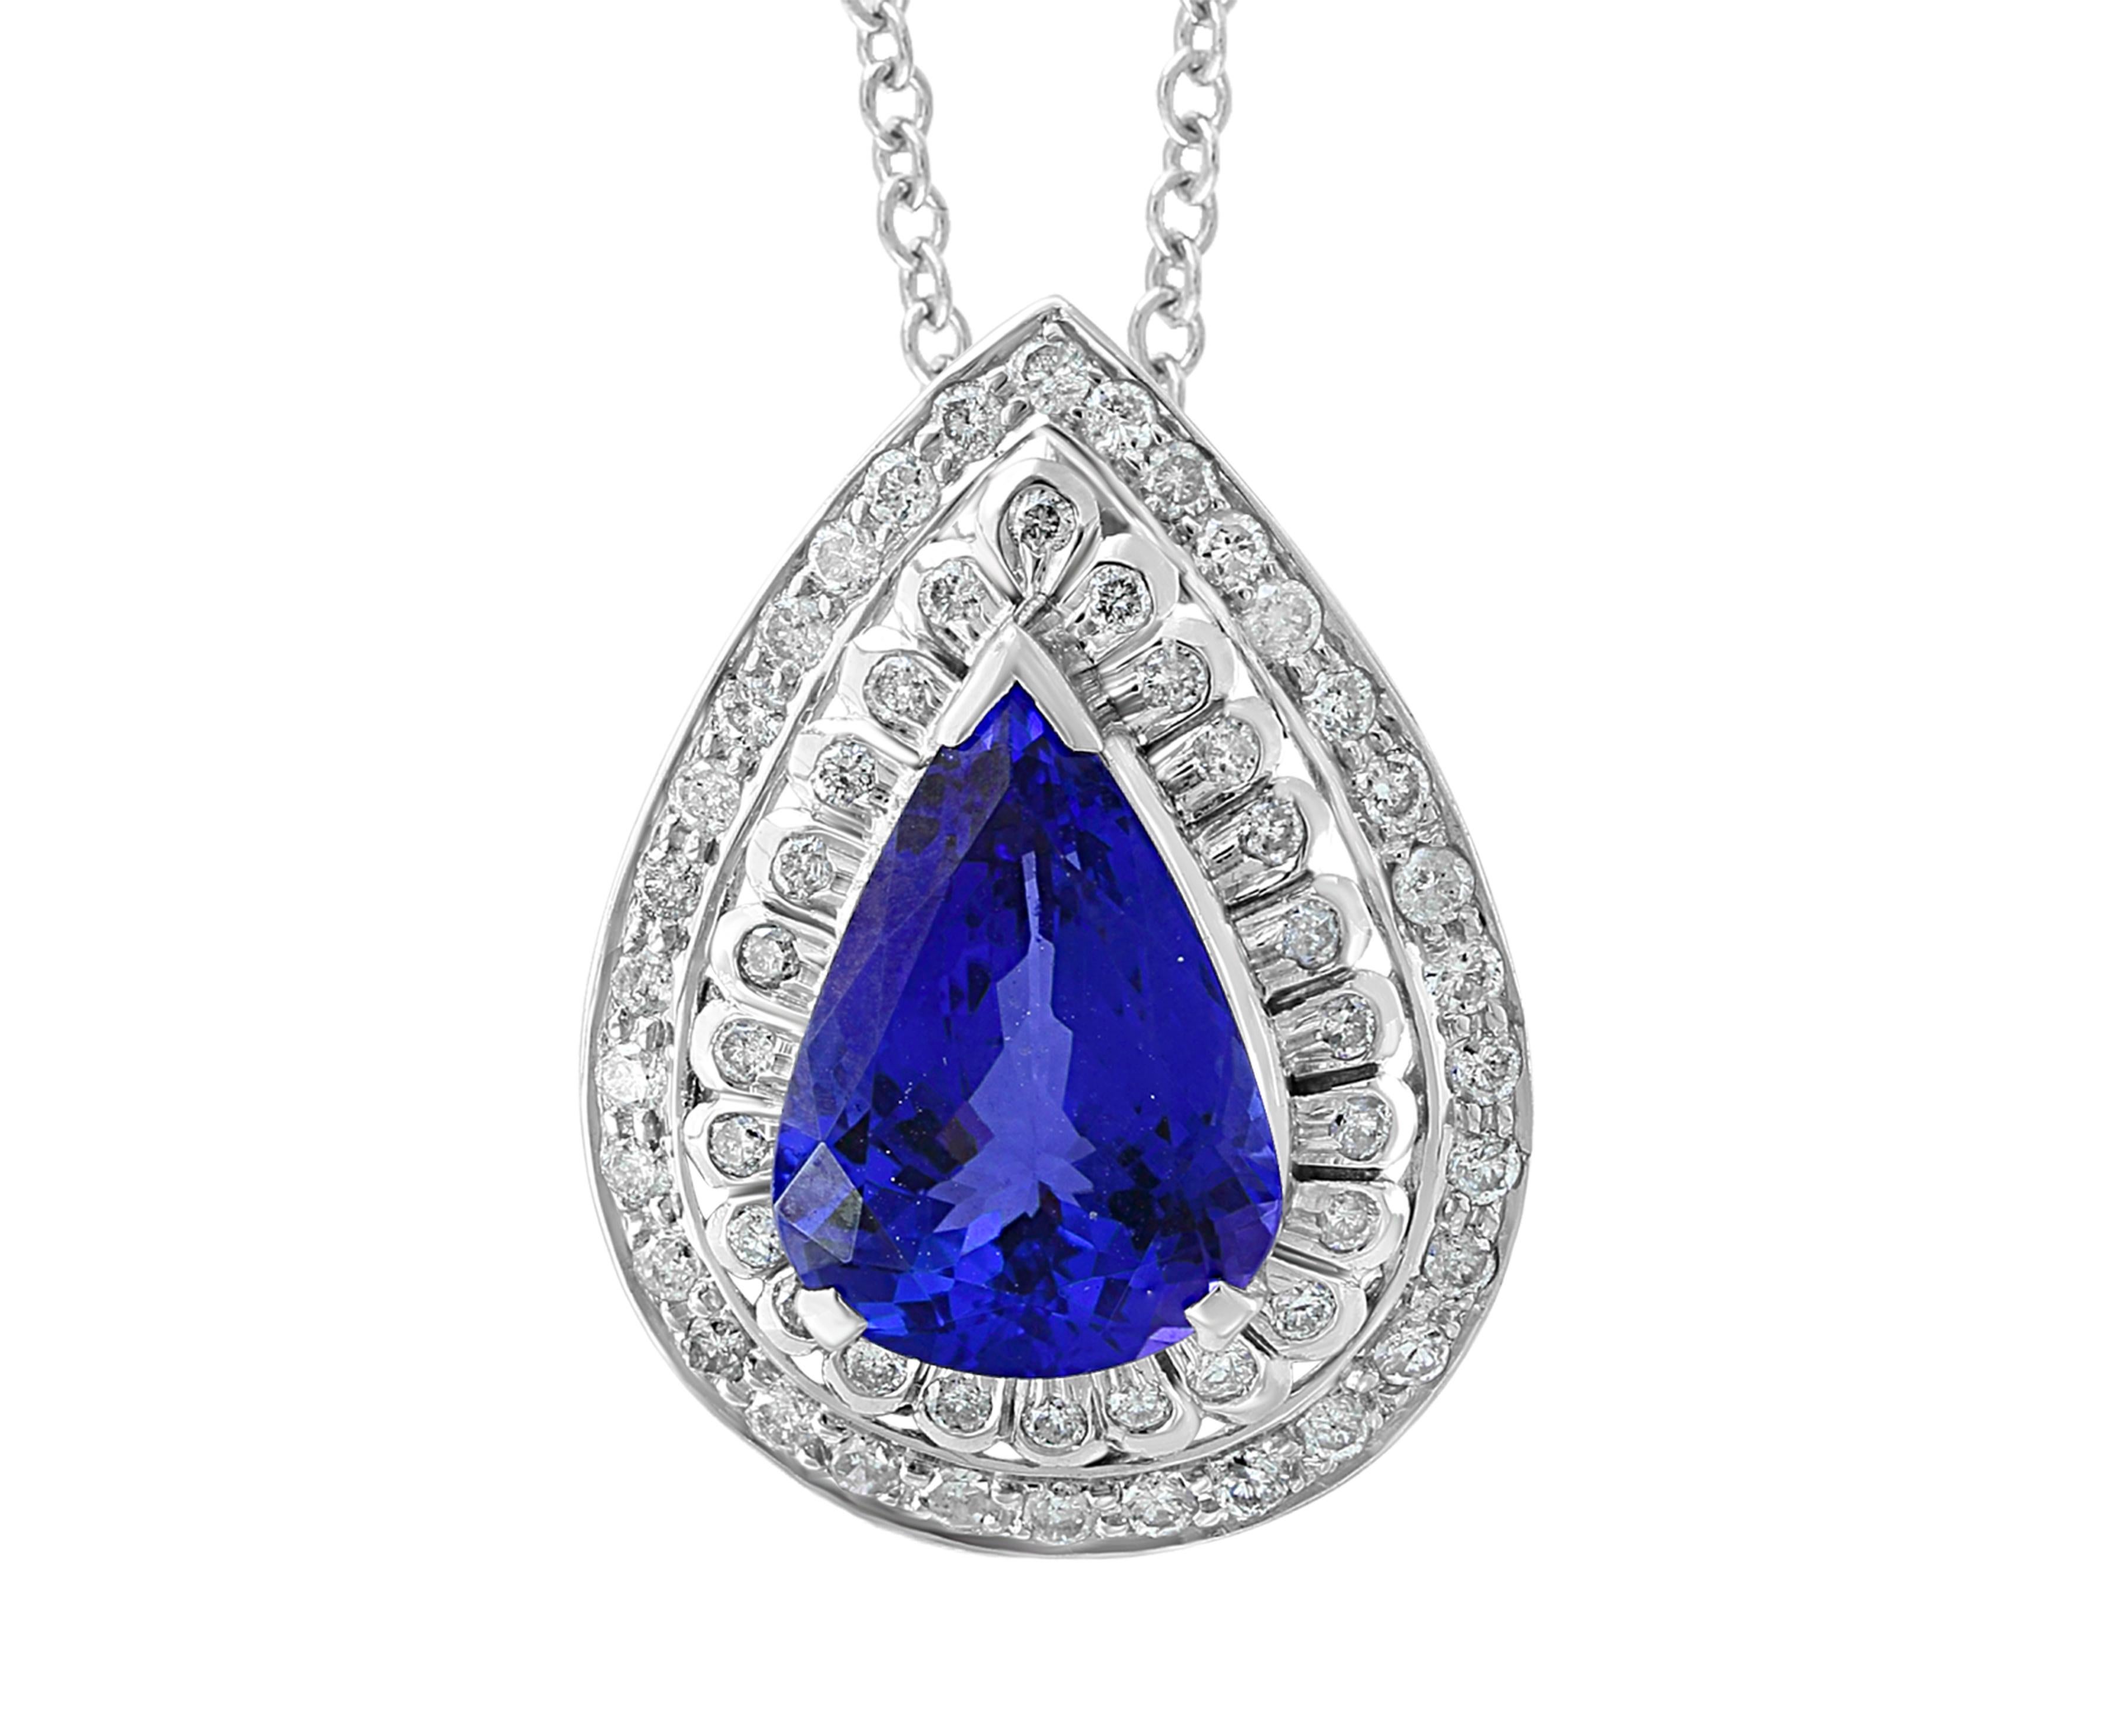 7 carats of fine  quality of  Tanzanite pendant surrounded by brilliant round  cut Diamonds all mounted in 18 karat White  gold. Weight of the necklace is 9 Grams . 
Tanzanite Weight  7 Carats
Diamond Weight 2.6 Carats
18 K gold Weight  9 Grams
Very